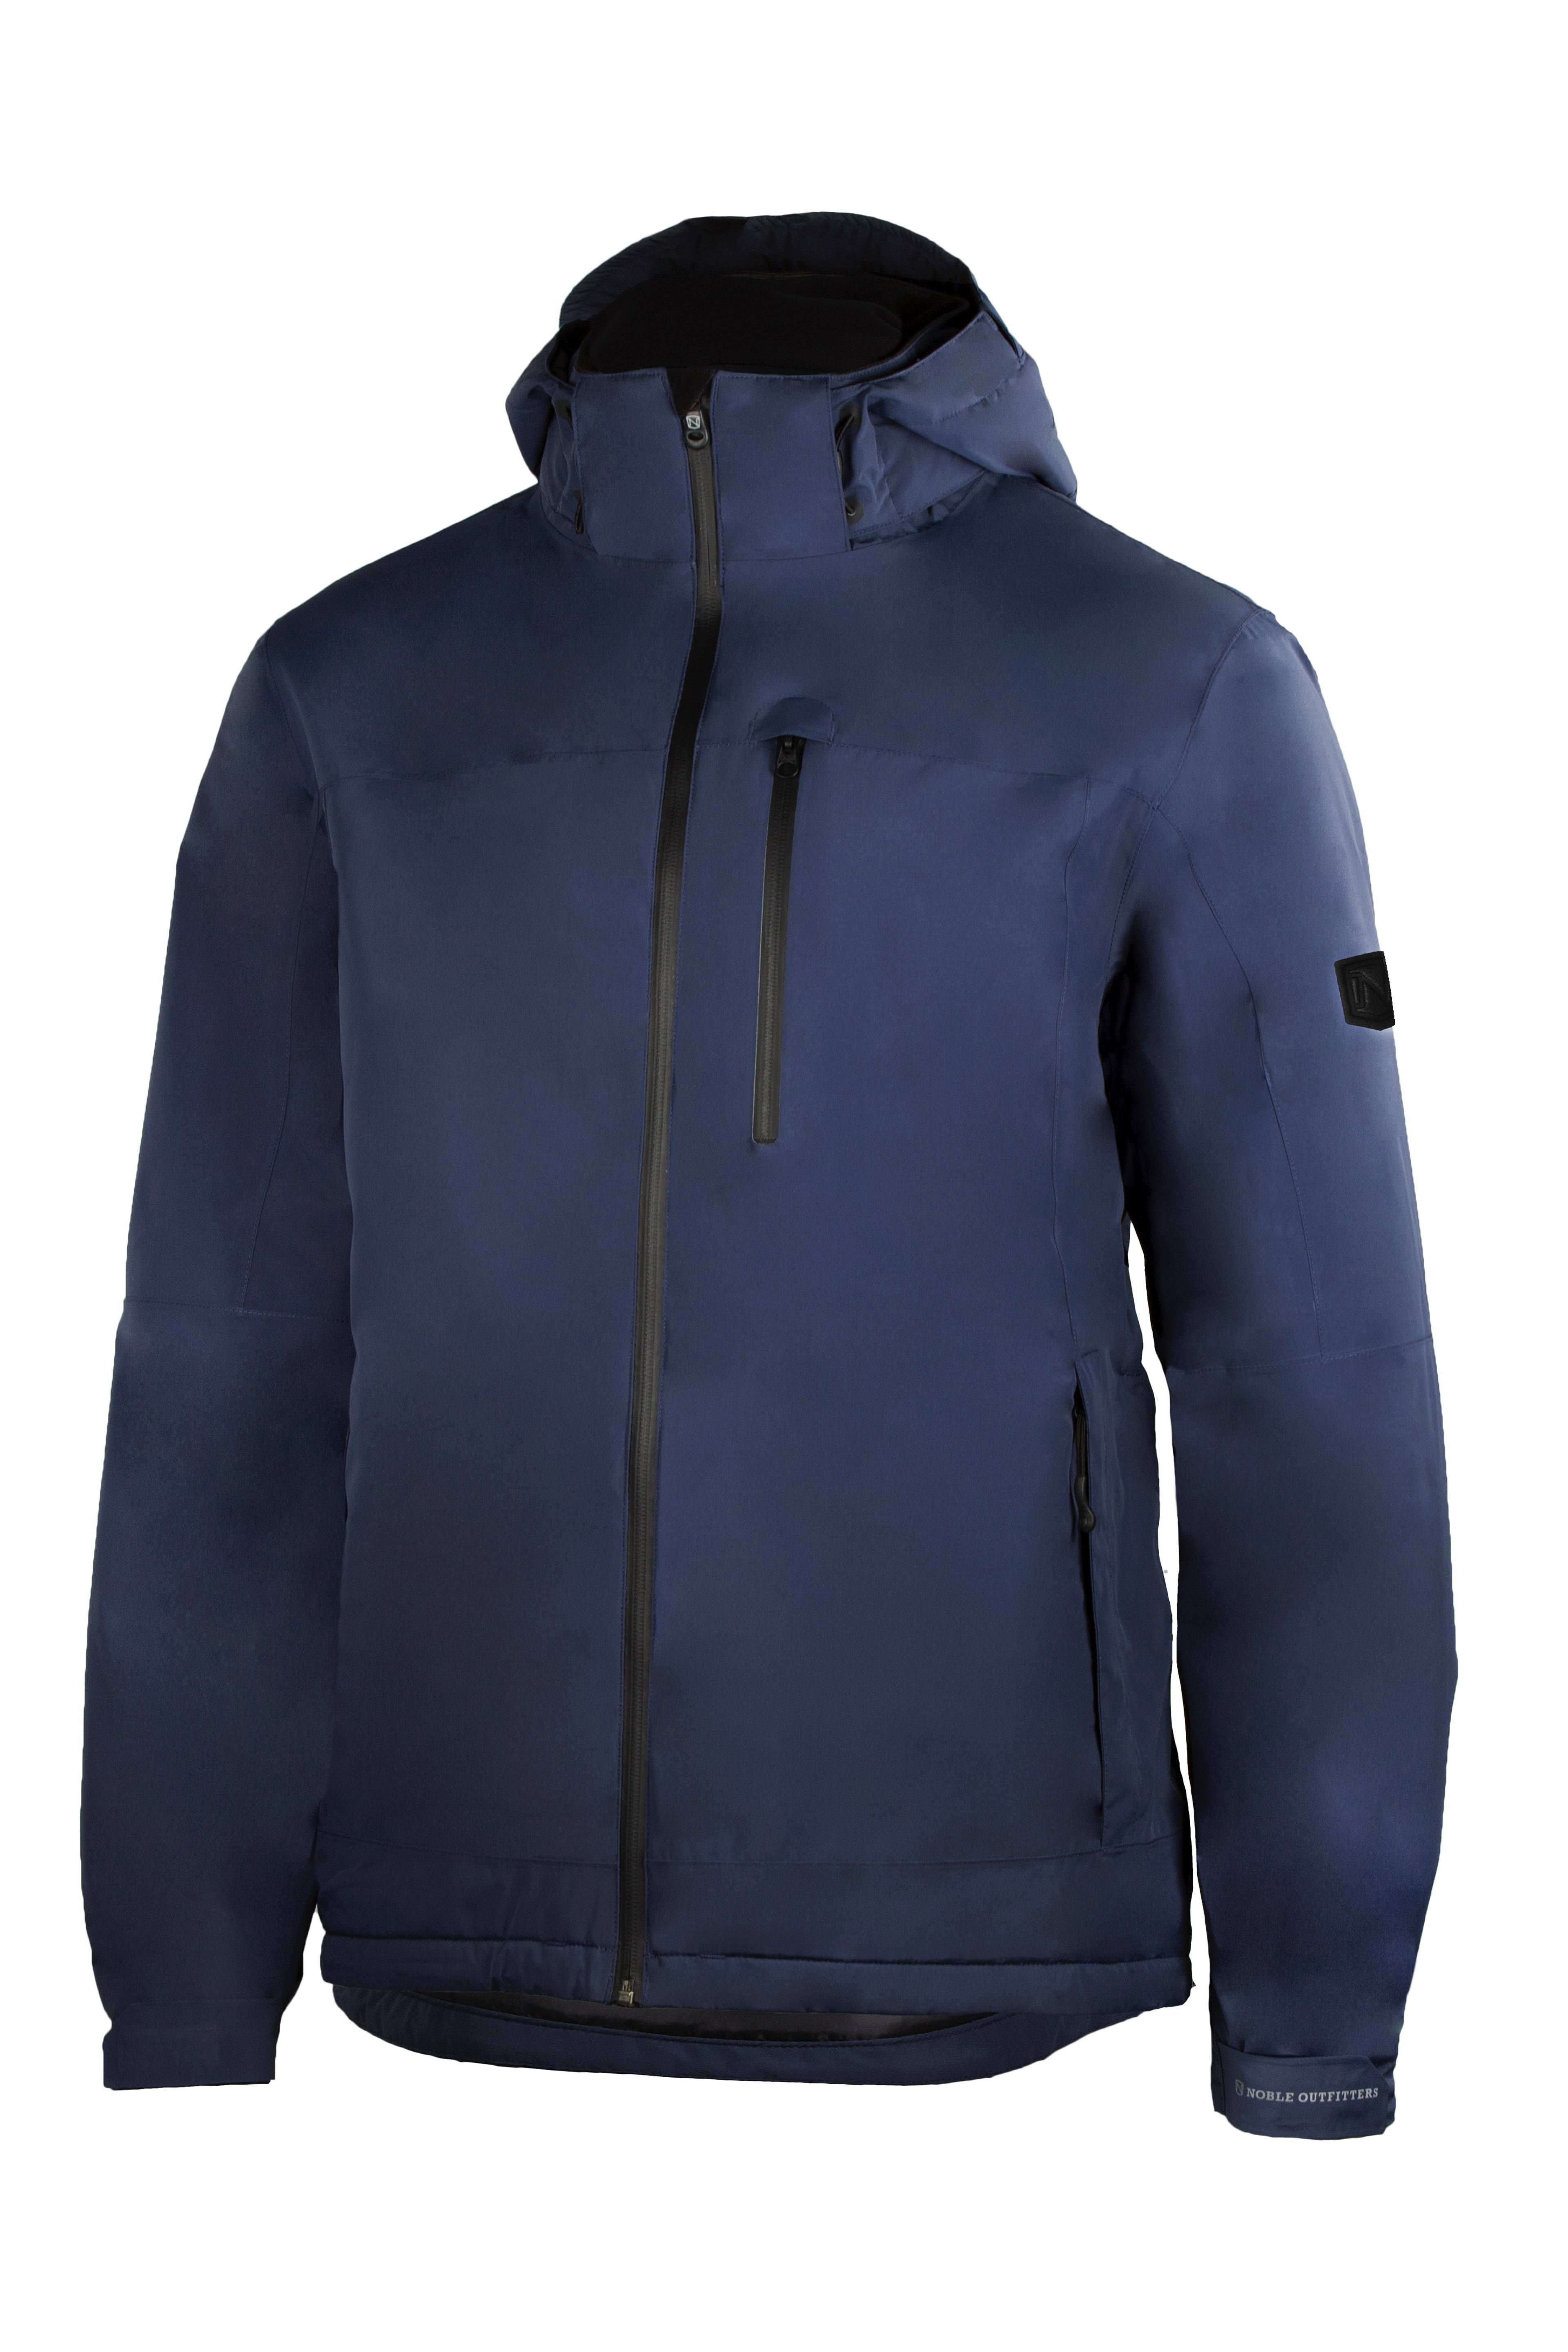 Noble Outfitters Endurance Jacket- Mens